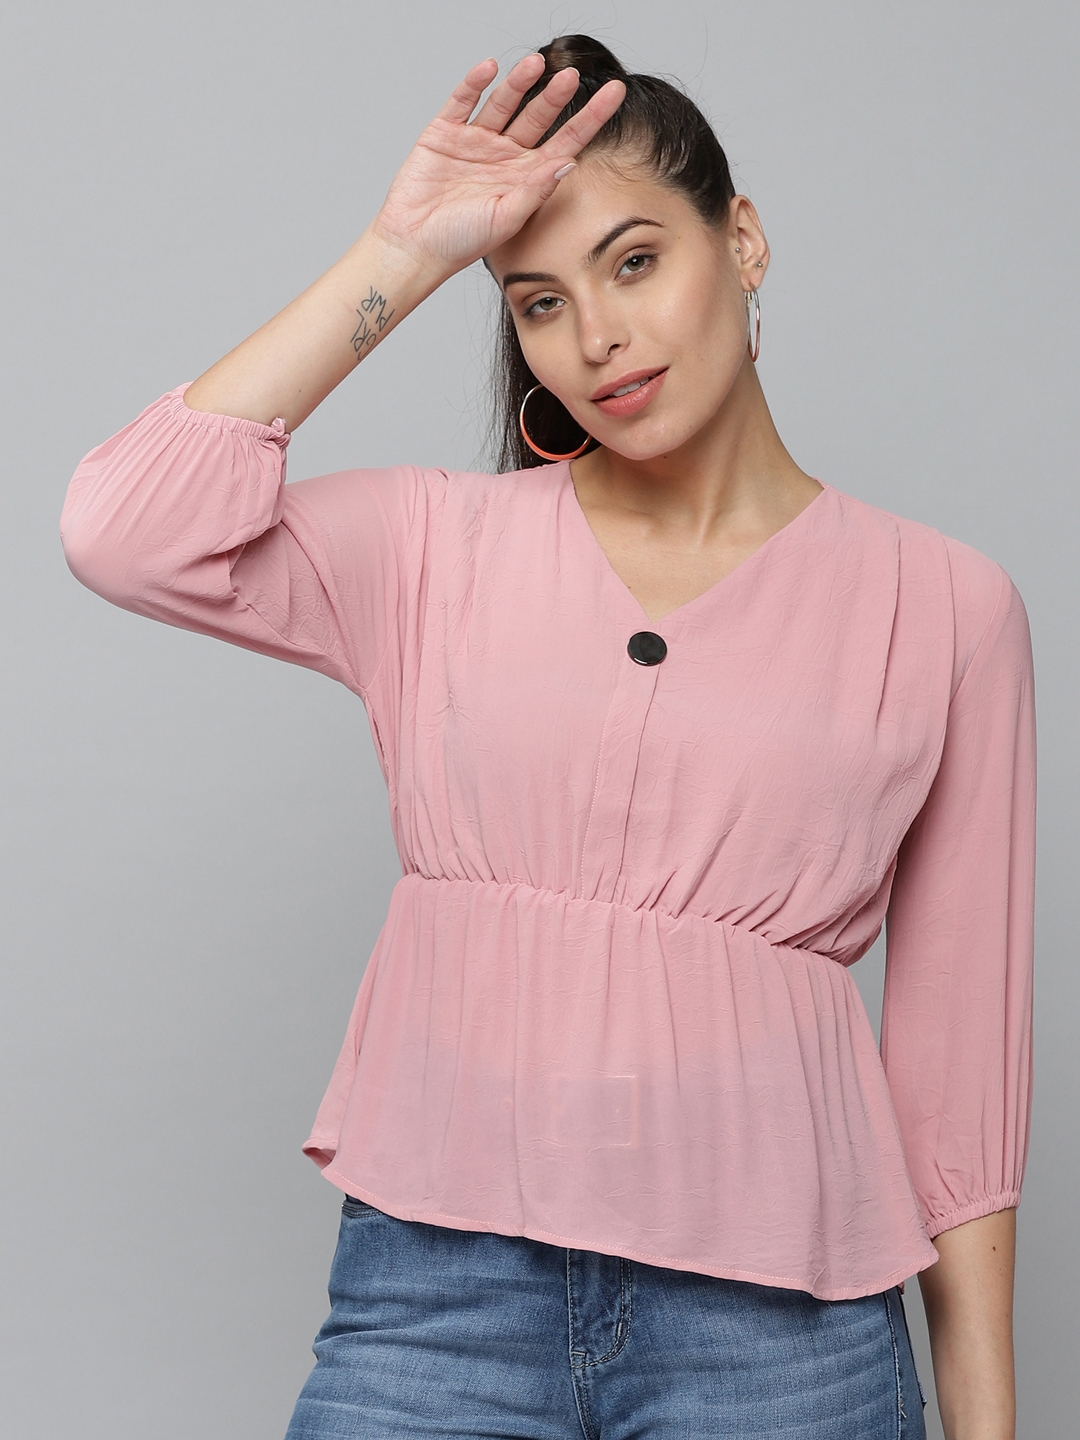 Women's Pink Polyester Solid Tops